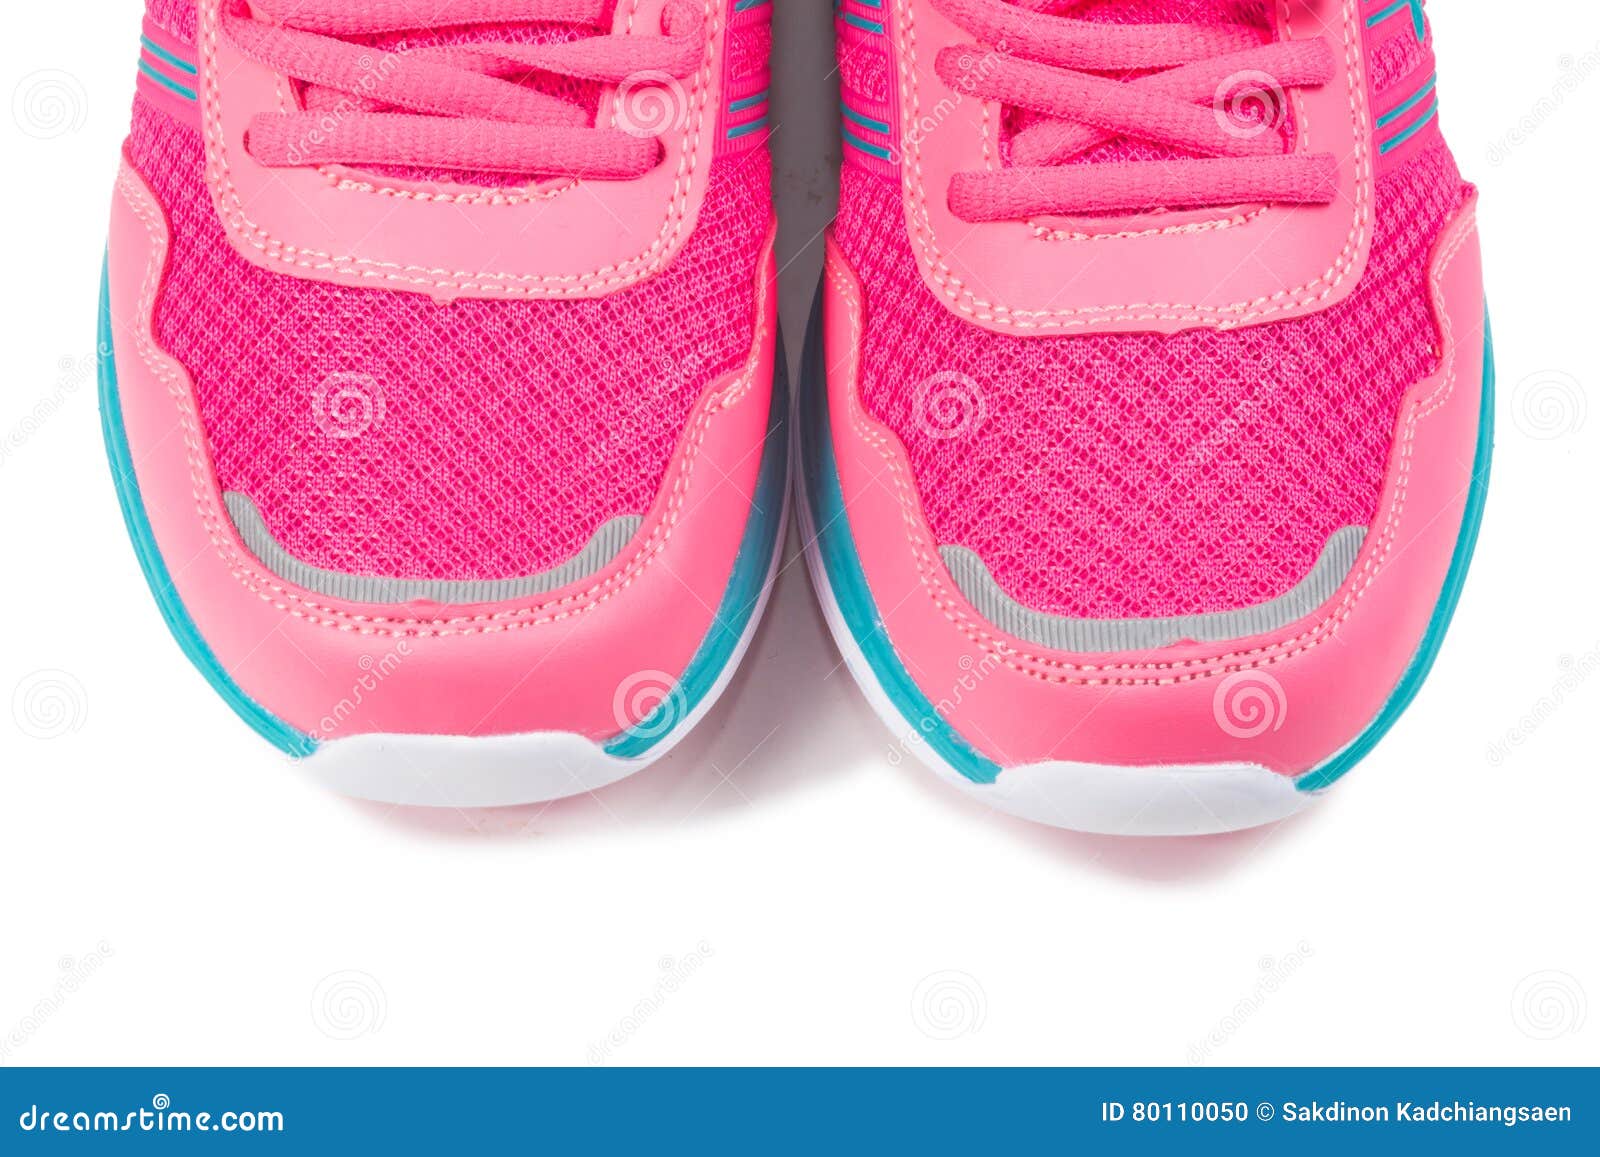 Pink sport shoes stock photo. Image of health, isolated - 80110050